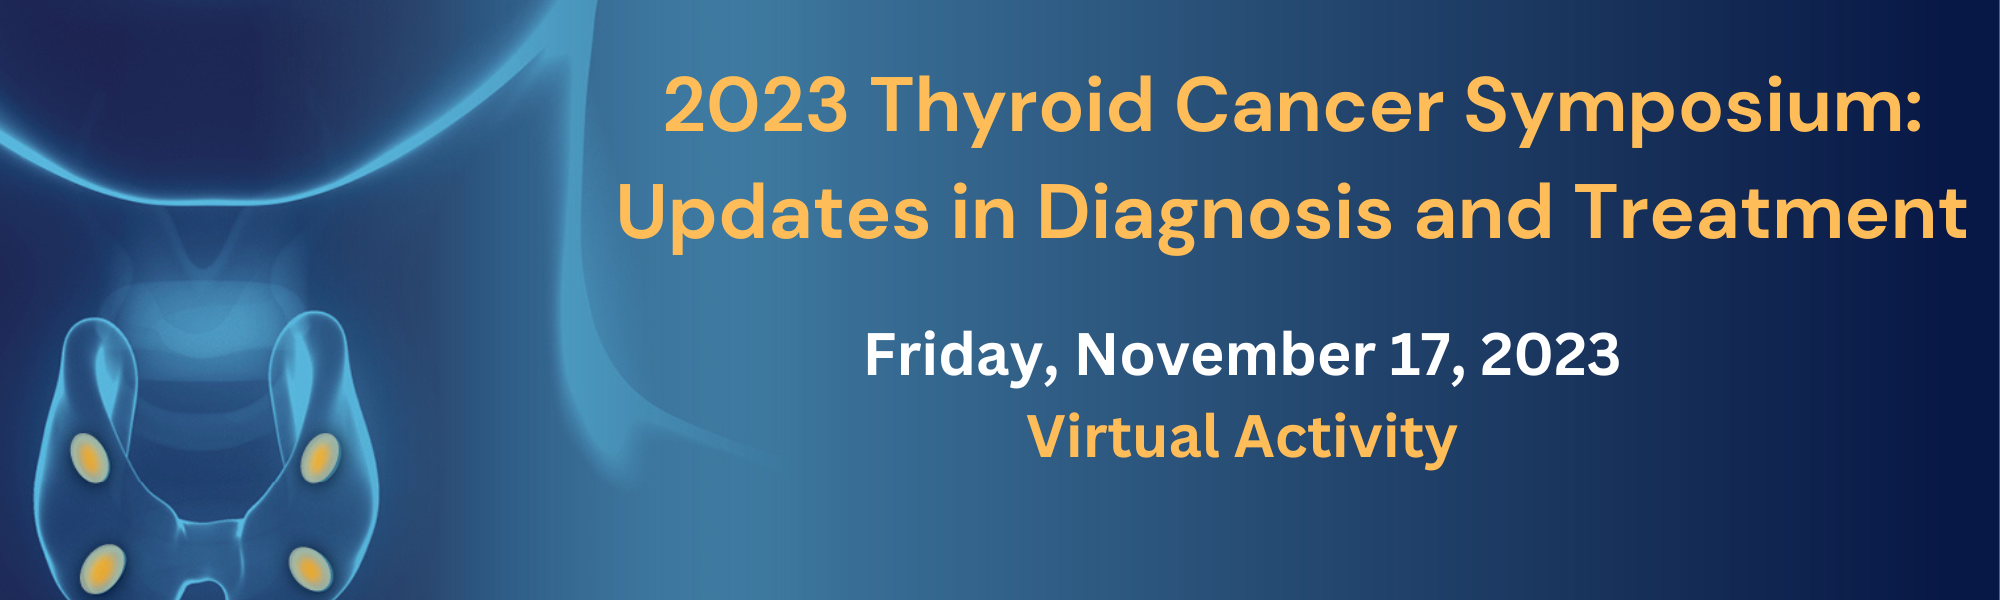 2023 Thyroid Cancer Symposium: Updates in Diagnosis and Treatment Banner